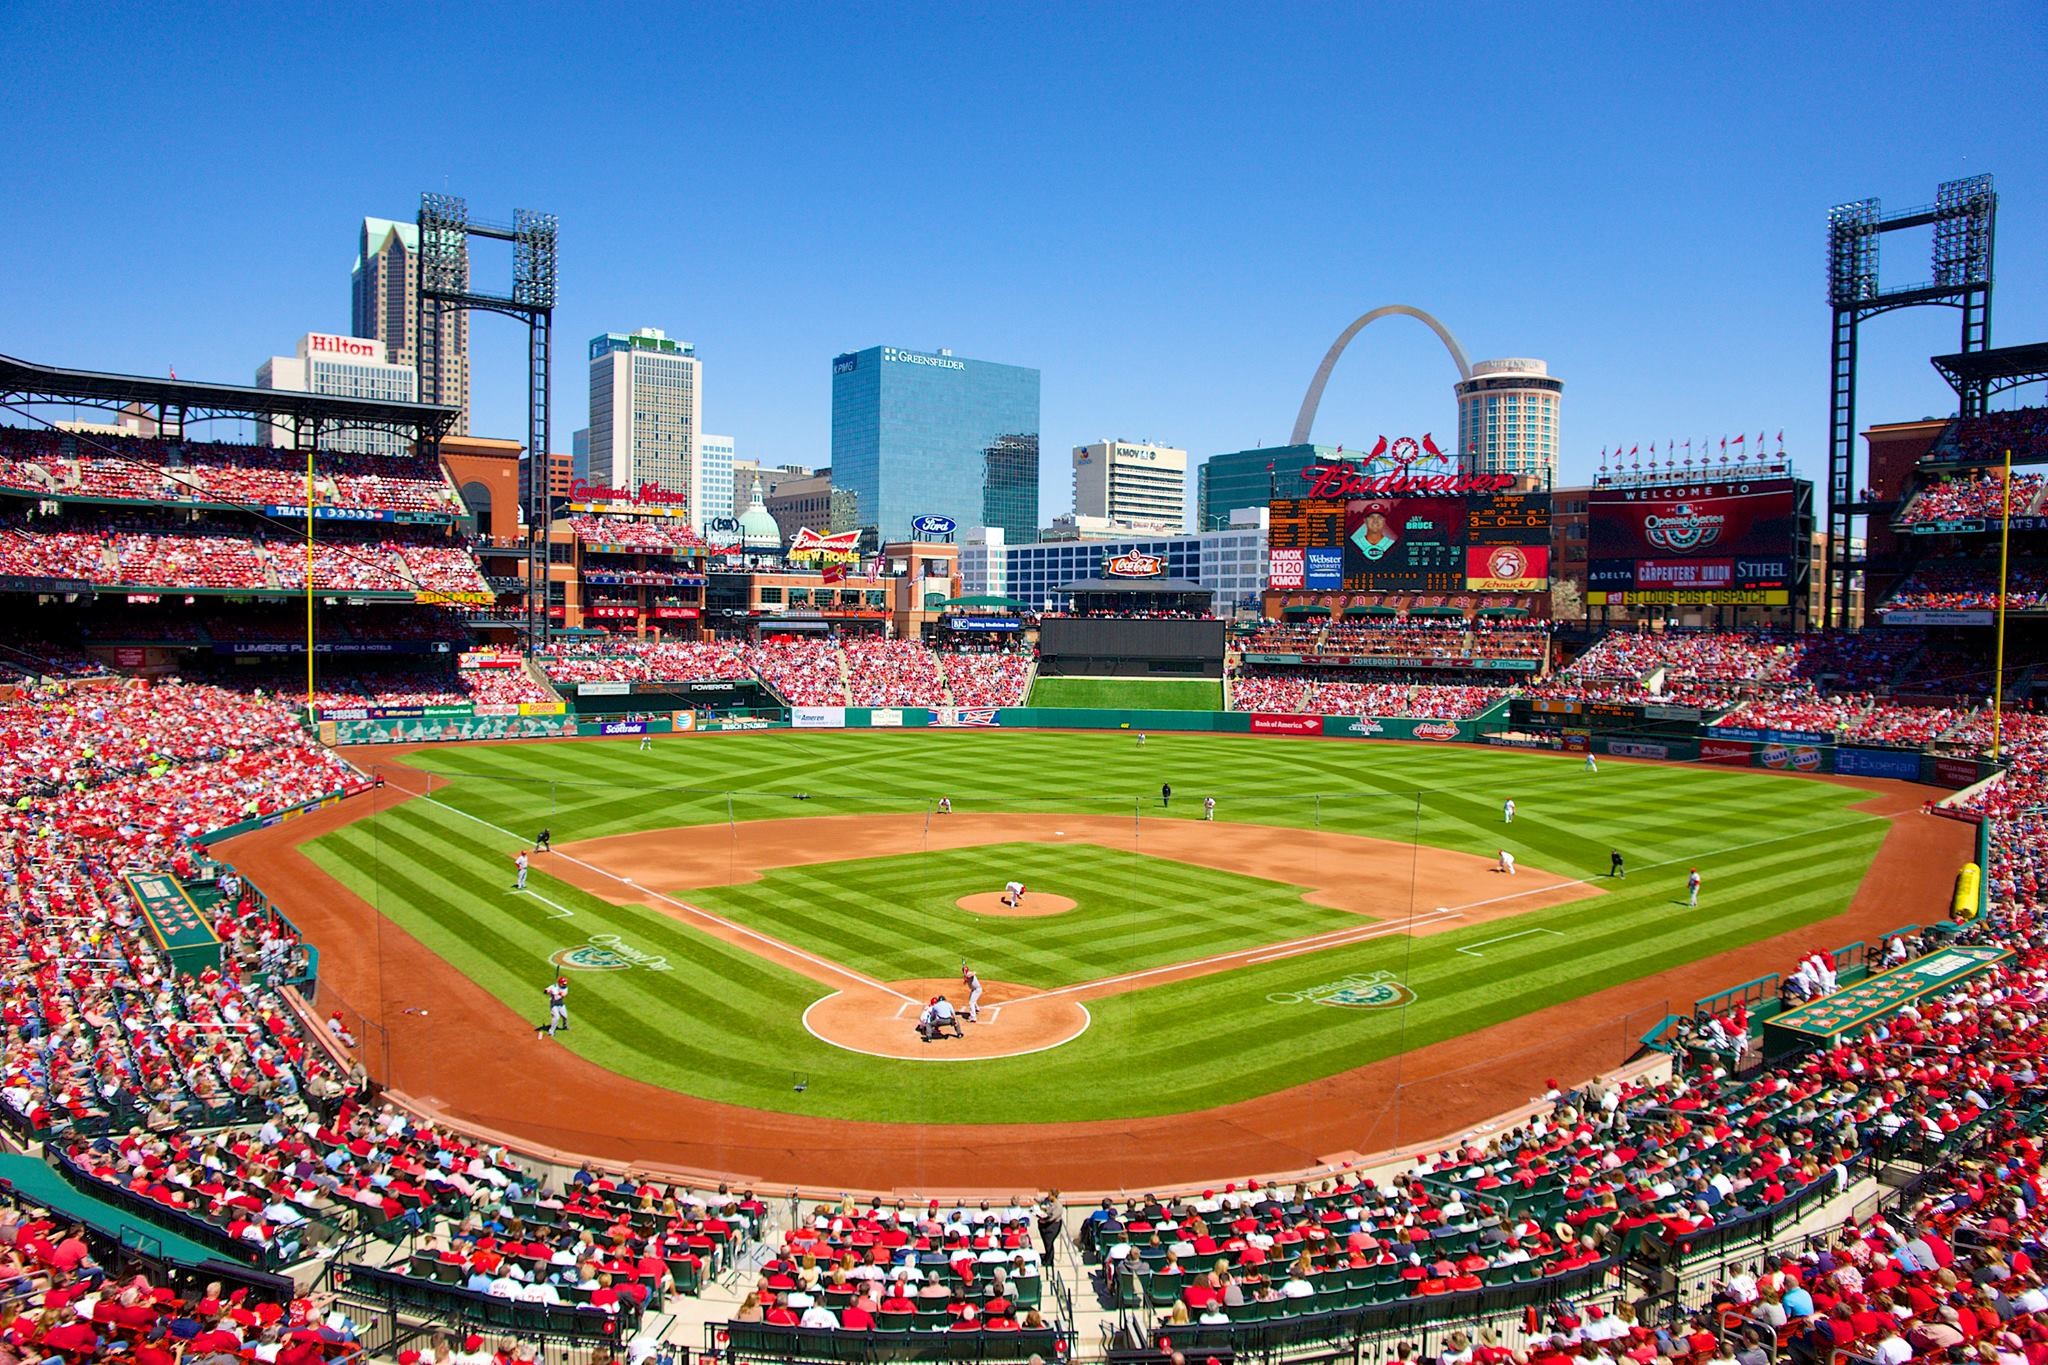 2048x1365 Join us at Busch Stadium August 1-3 for the celebration